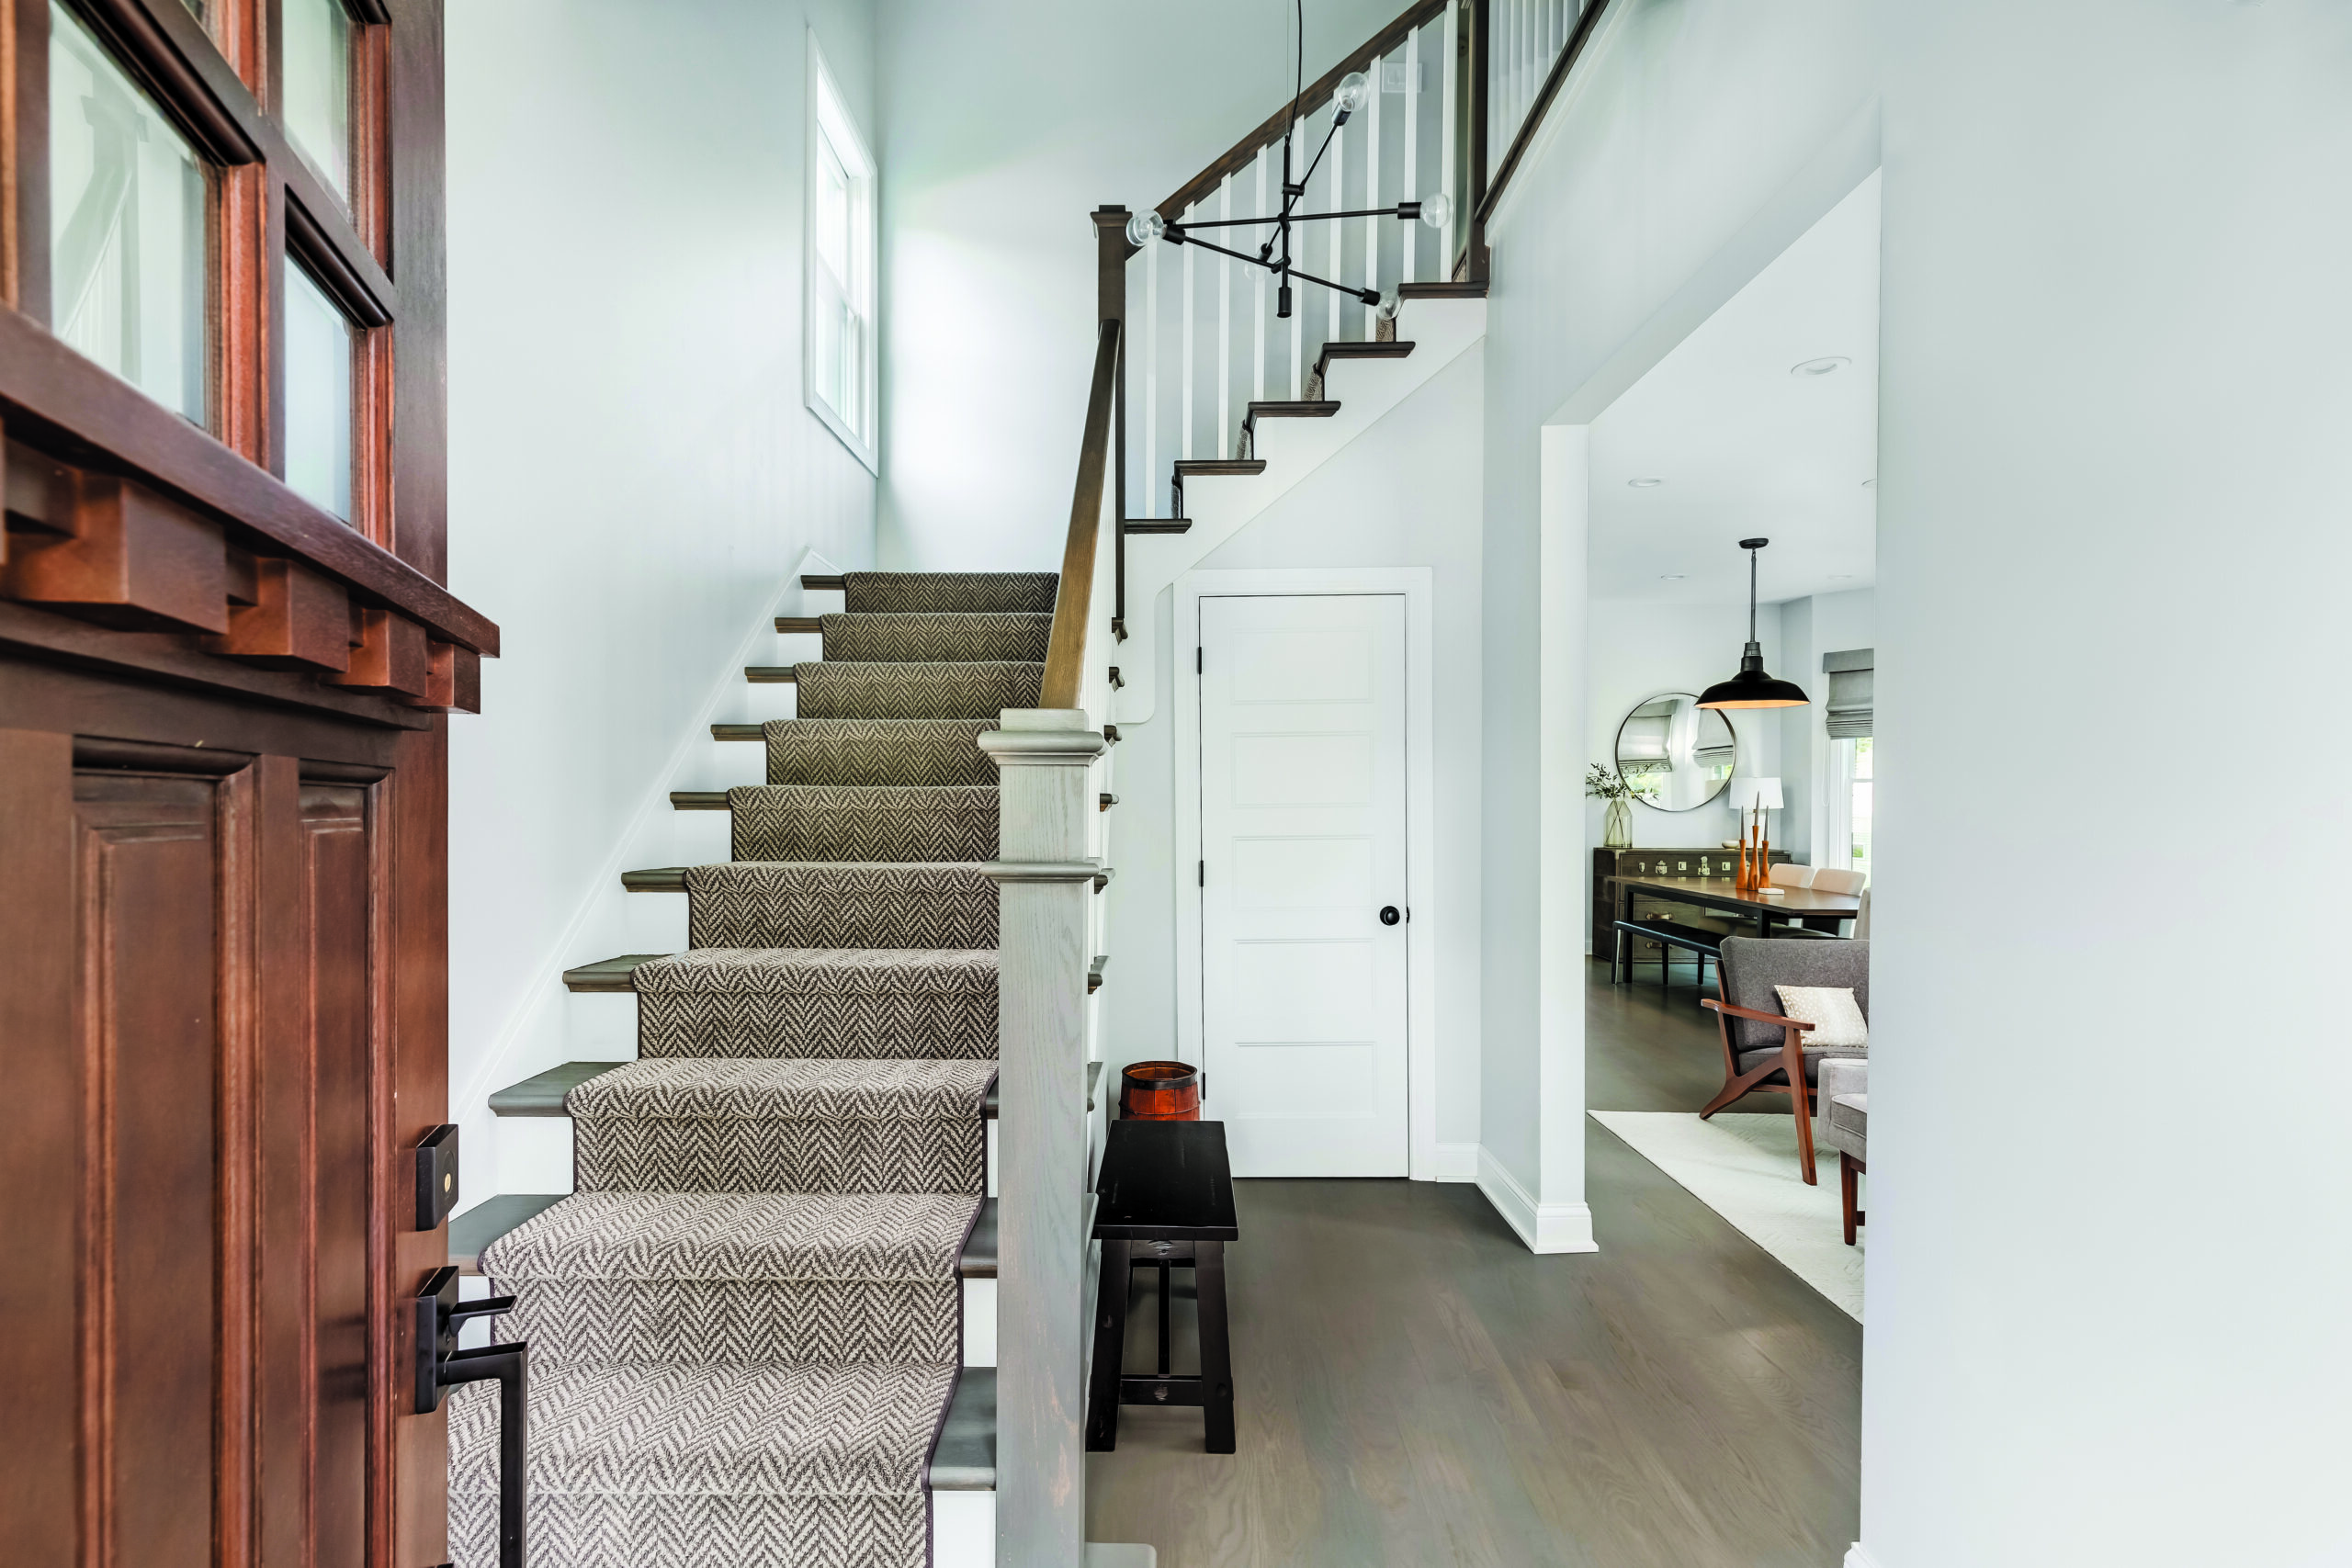 Stair Parts & Stair Design: Remodeling Stairs—What Can Be Changed?